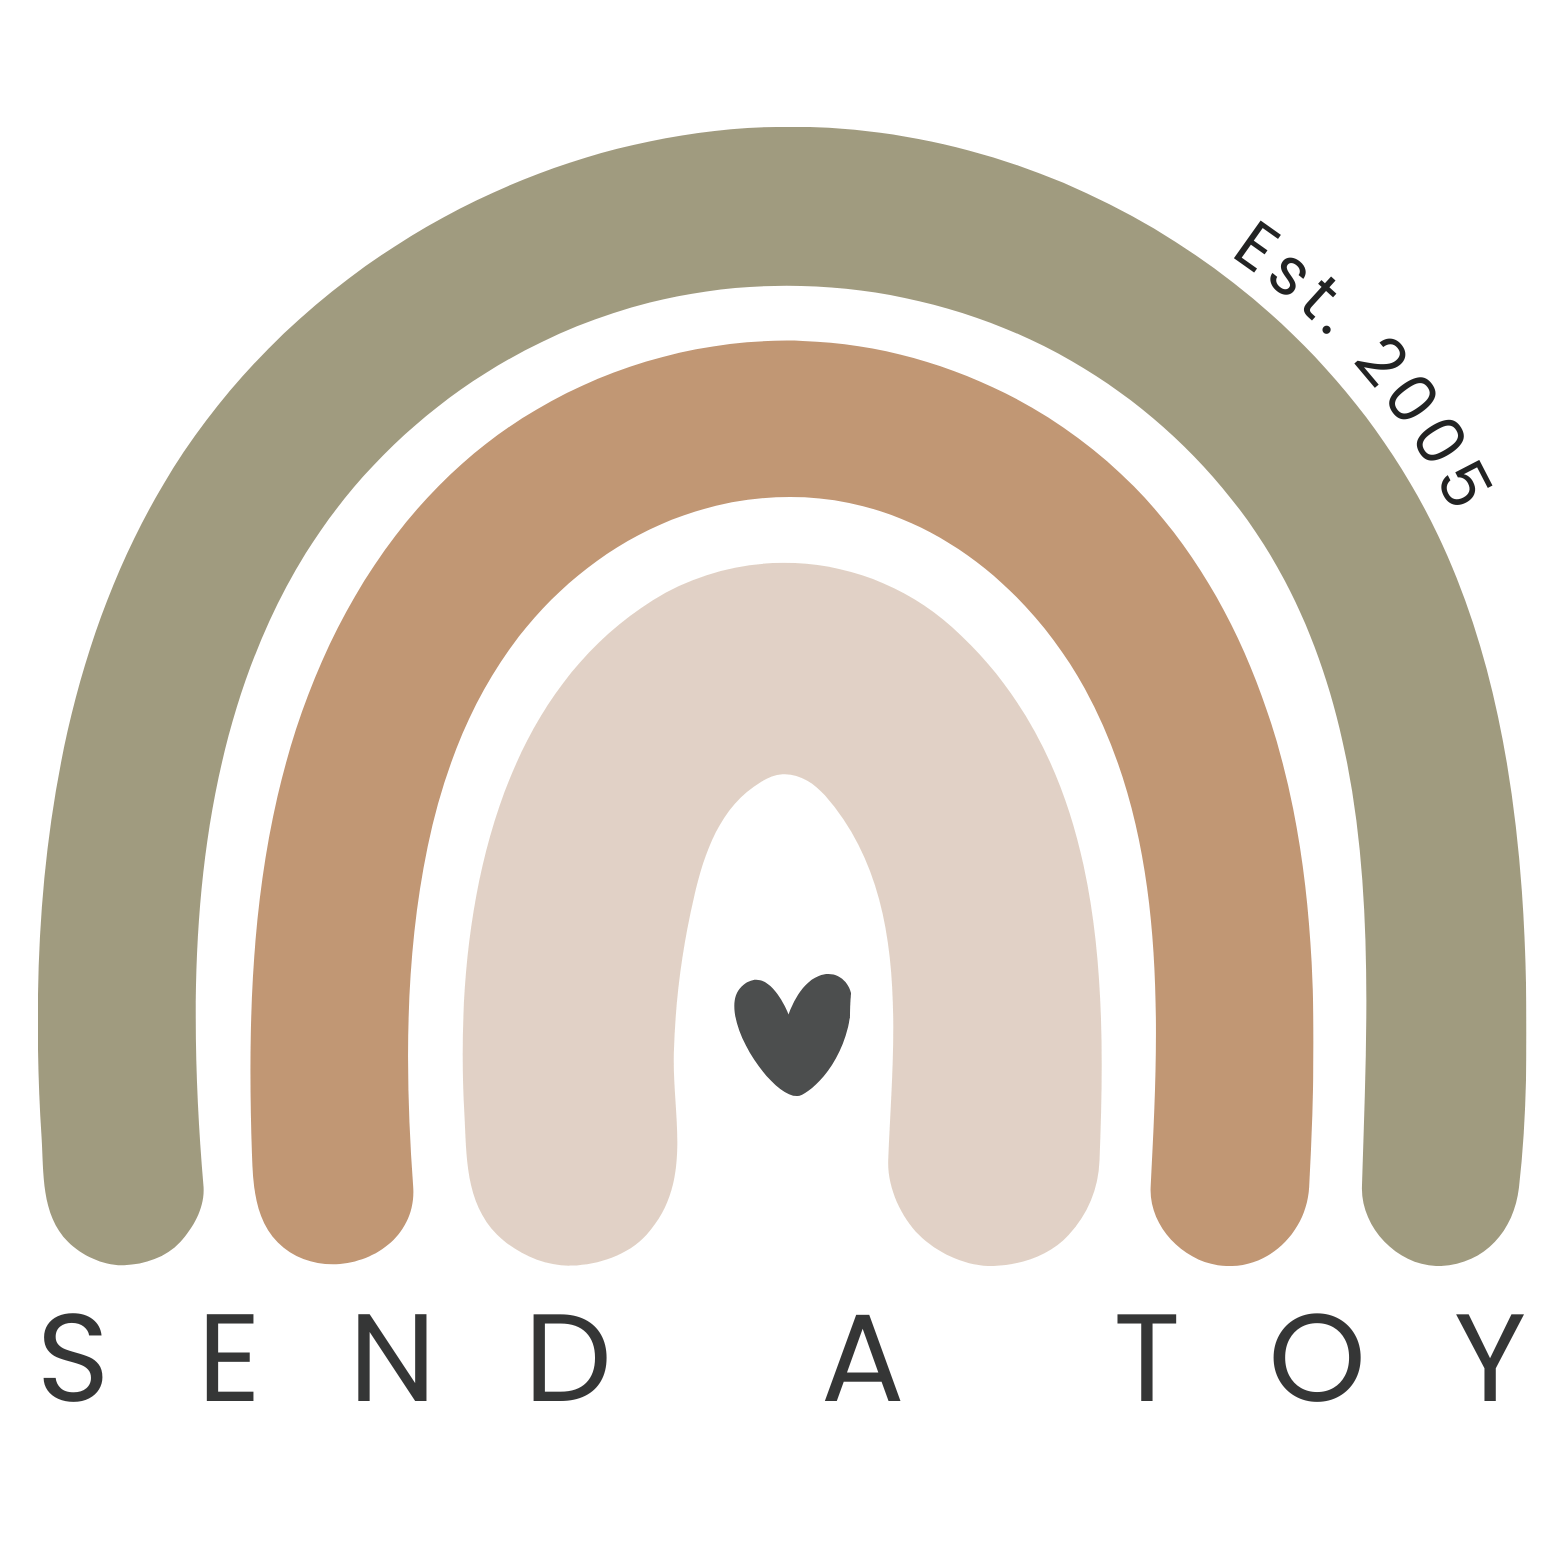 Send A Toy logo showing a green and tan rainbow with black heart in the middle